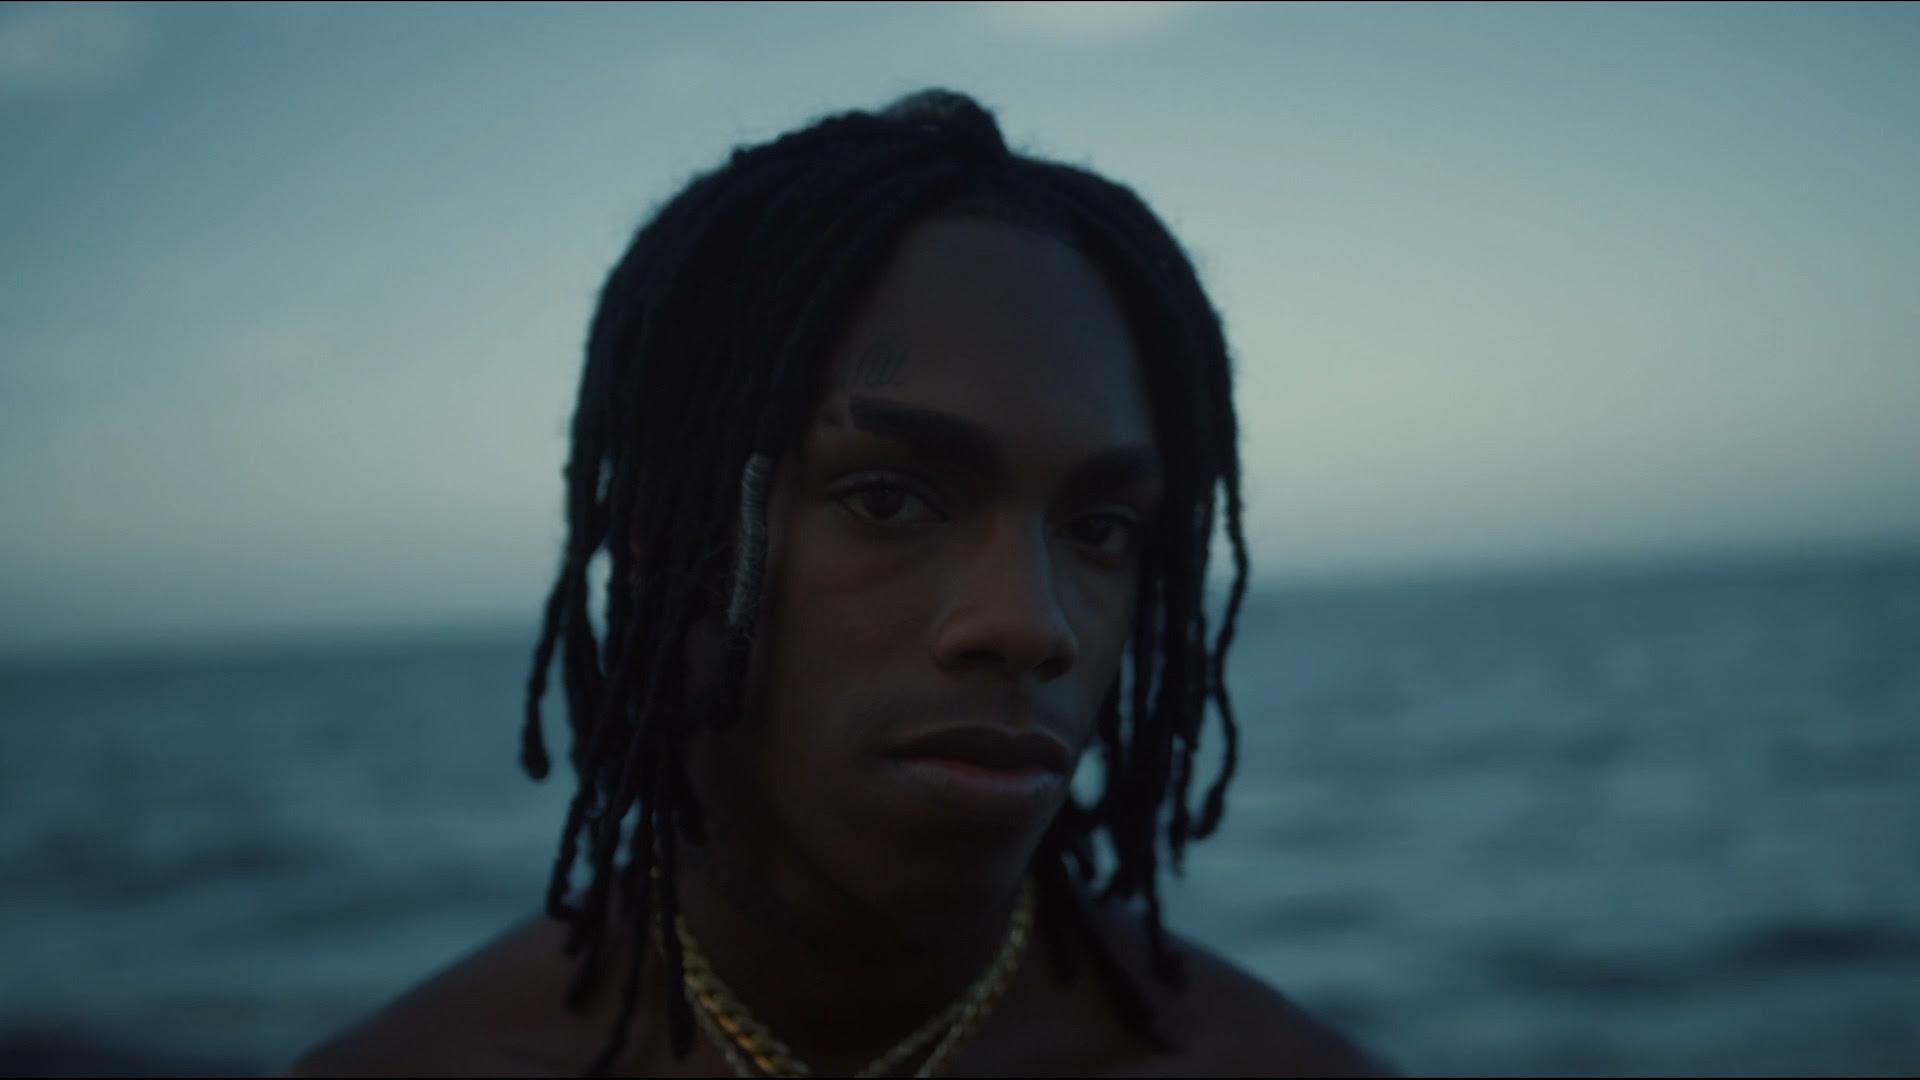 Florida Rapper YNW Melly Releases MELLY Documentary